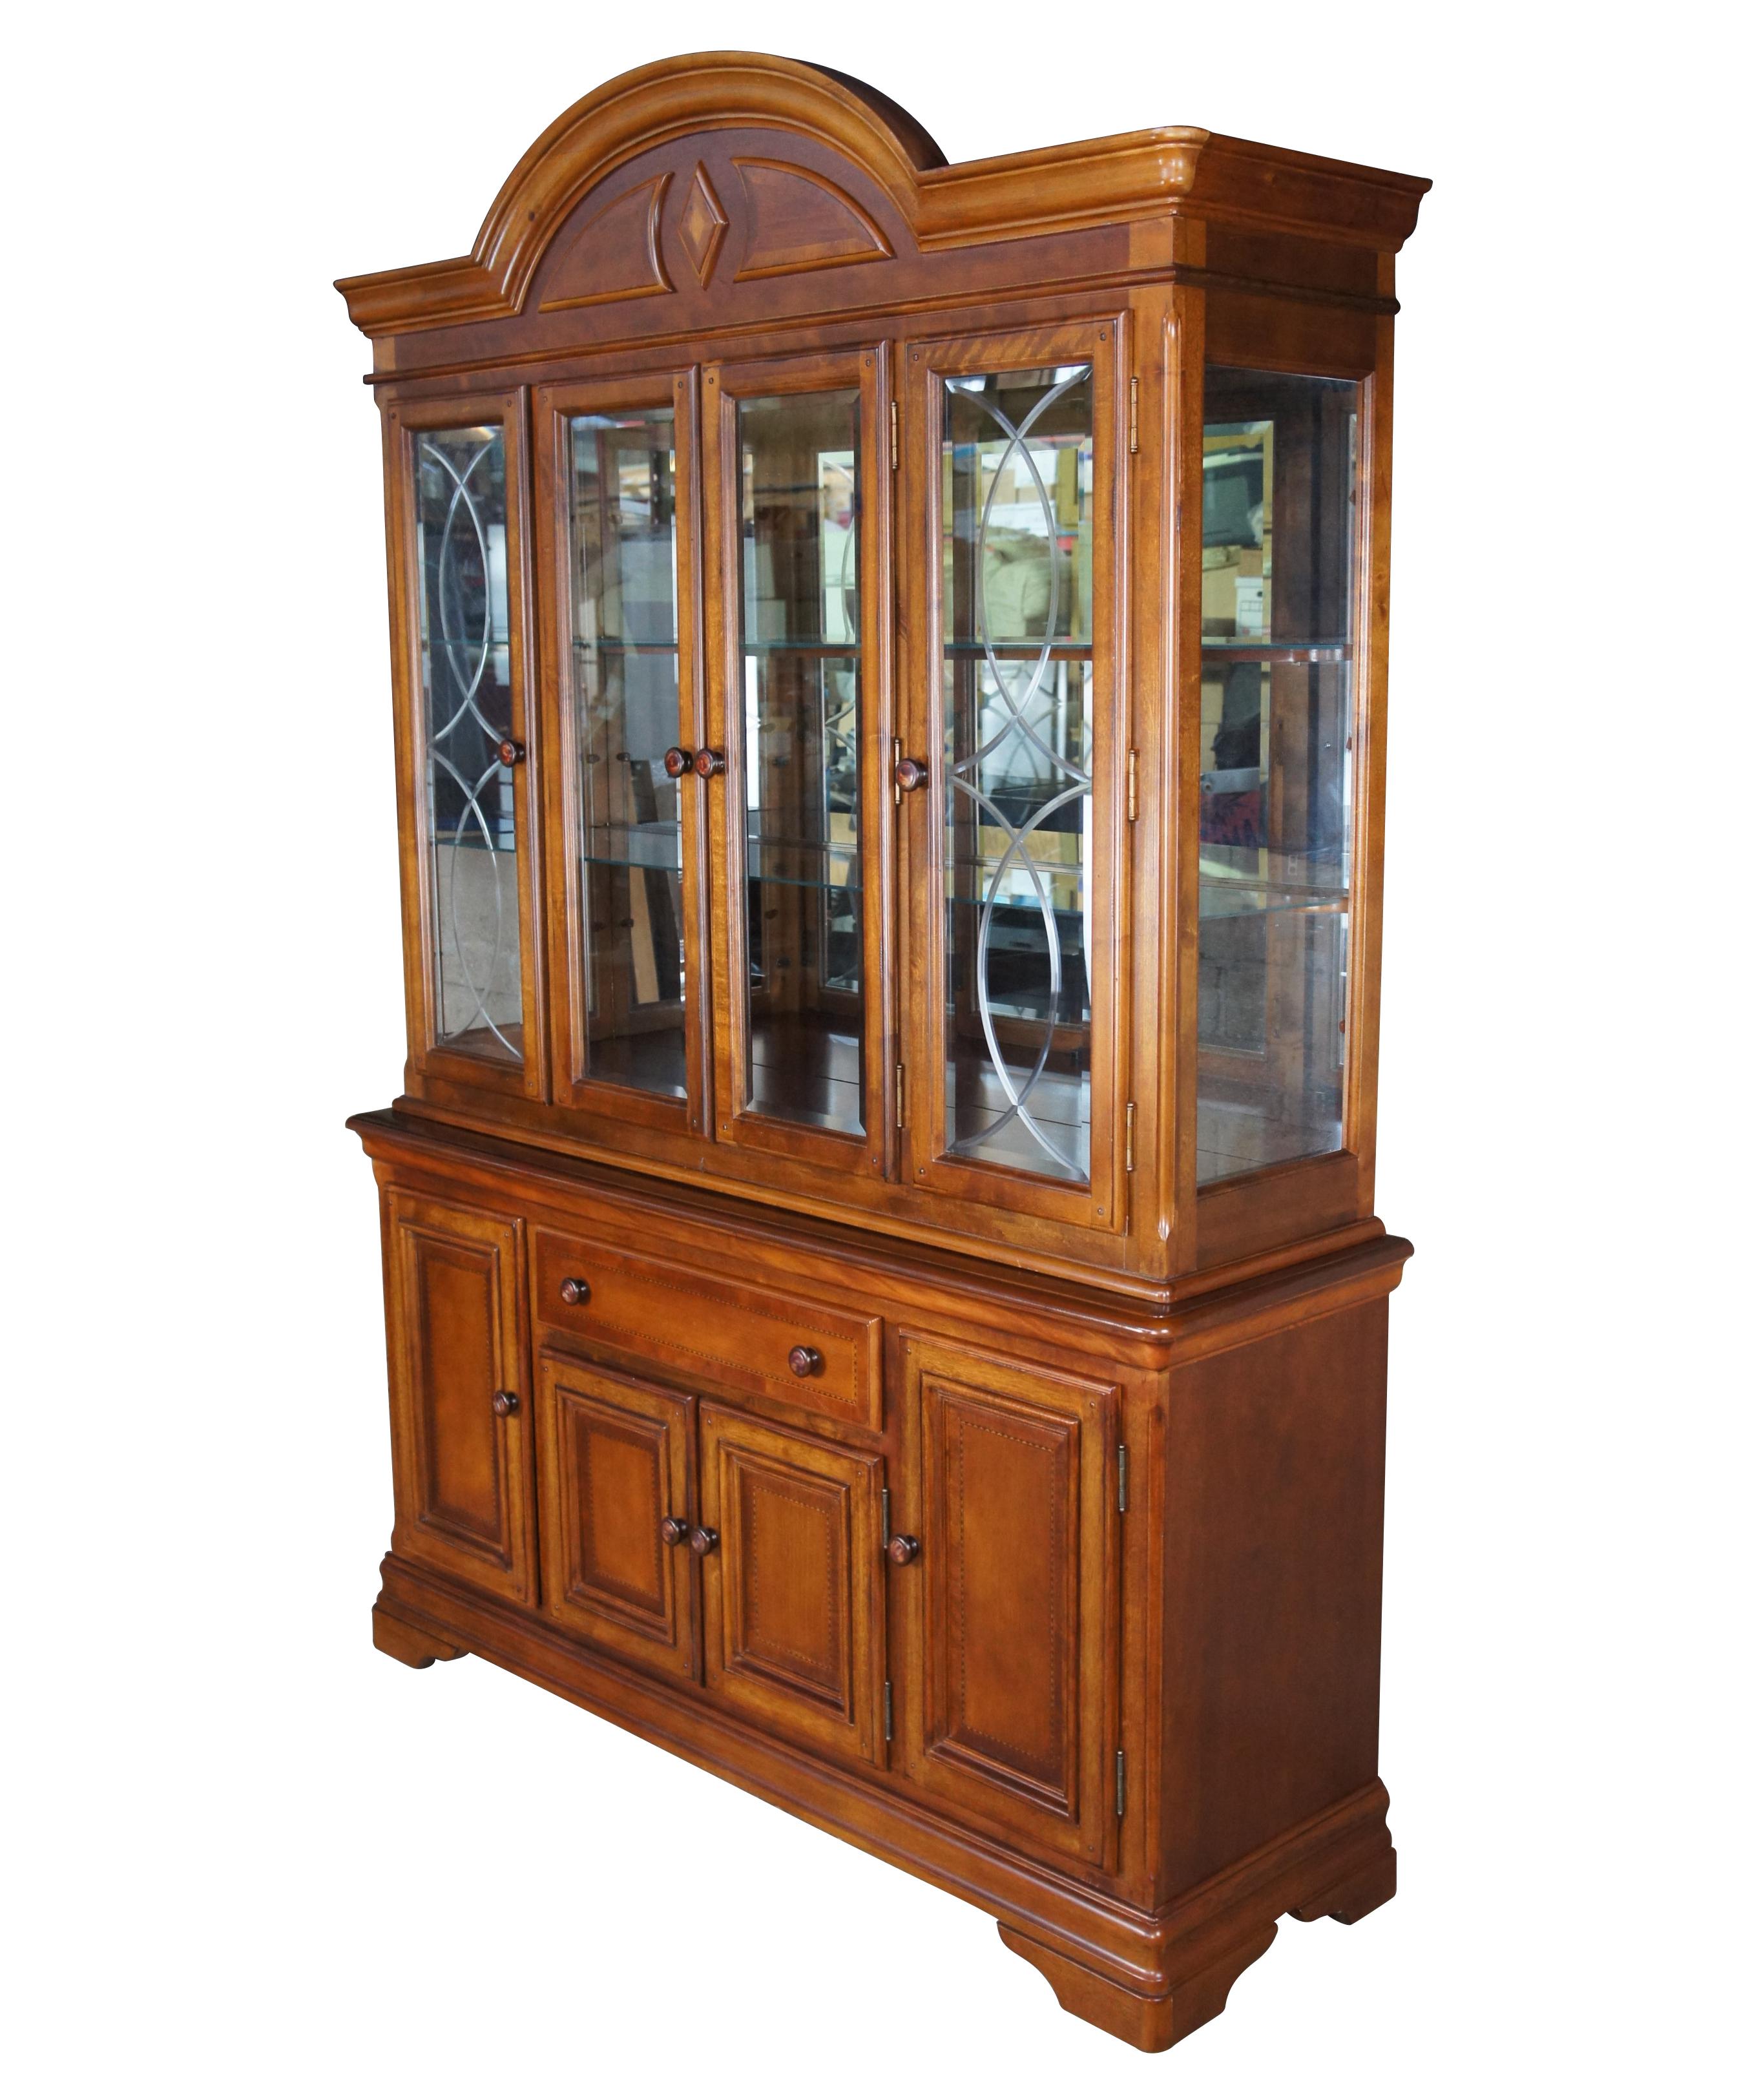 Alexander Julian Home Colours Buffet and Hutch. Made from cherry with geometric inlaid paneling and swirl marble door pulls. Display portion is illuminated with two glass shelves and ornate beveled glass doors. The base has a central drawer with